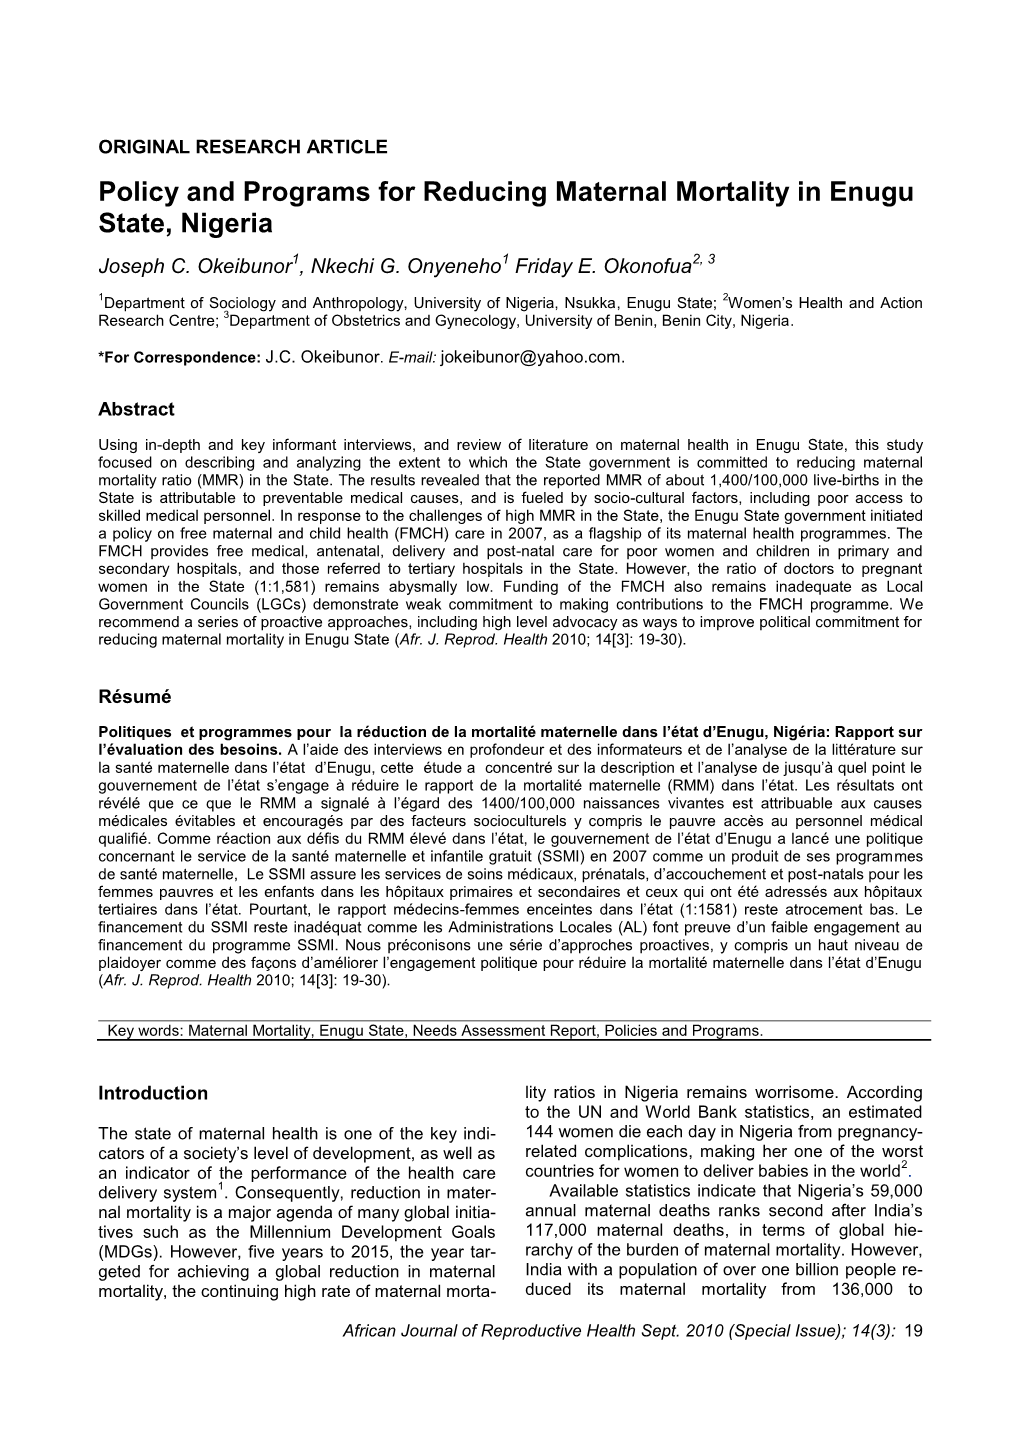 Policy and Programs for Reducing Maternal Mortality in Enugu State, Nigeria